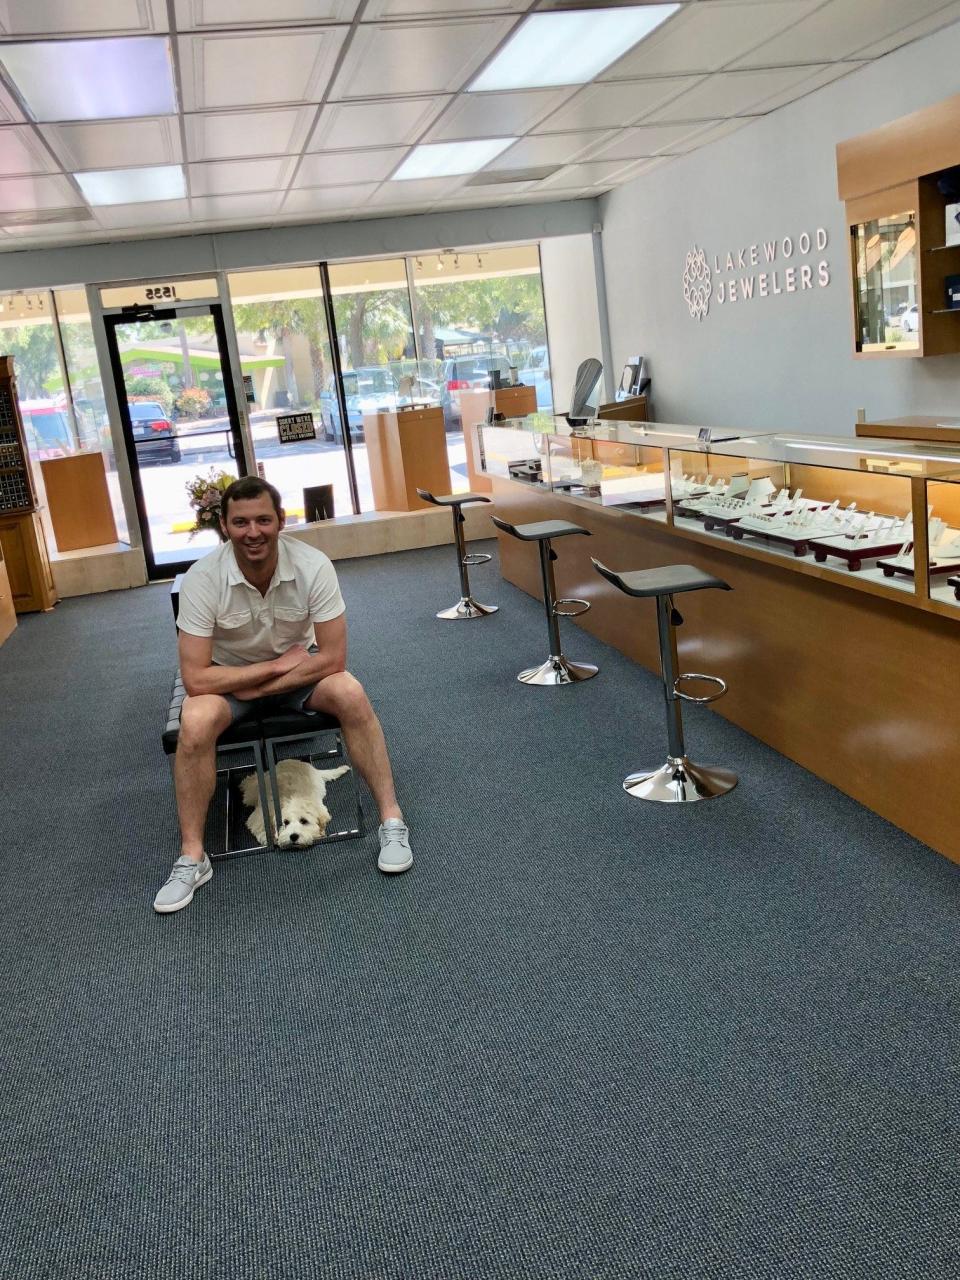 Brian Kurz and his dog Ollie, who works as a therapy pet, visit Lakewood Jewelers at its opening day more than four years ago. After he was killed in a car crash, store owners David and Chace Breitmoser worked to restore his wedding ring and a St. Christopher's medal he had been wearing.